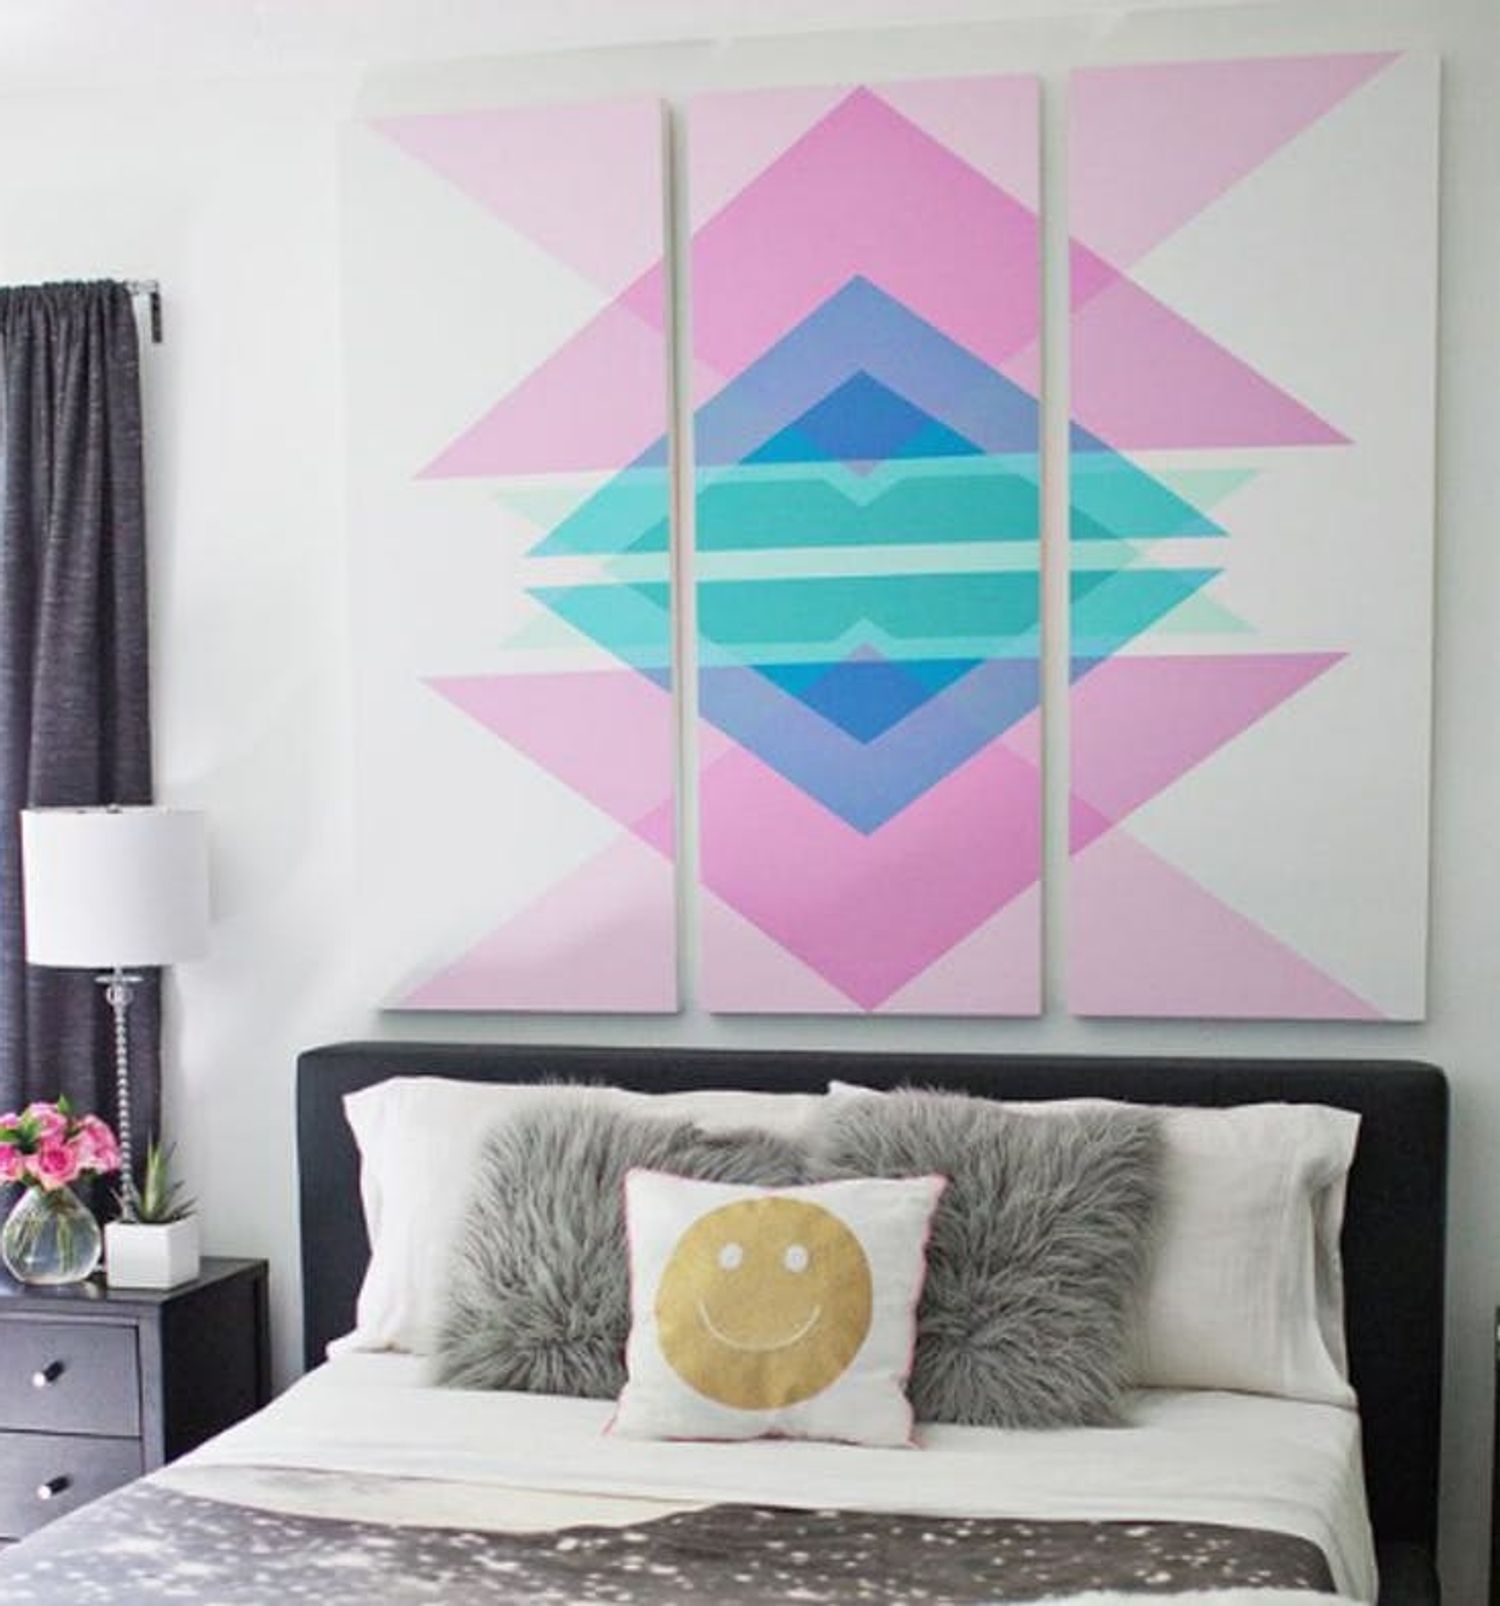 20 Ways to Decorate a Rental Without Painting